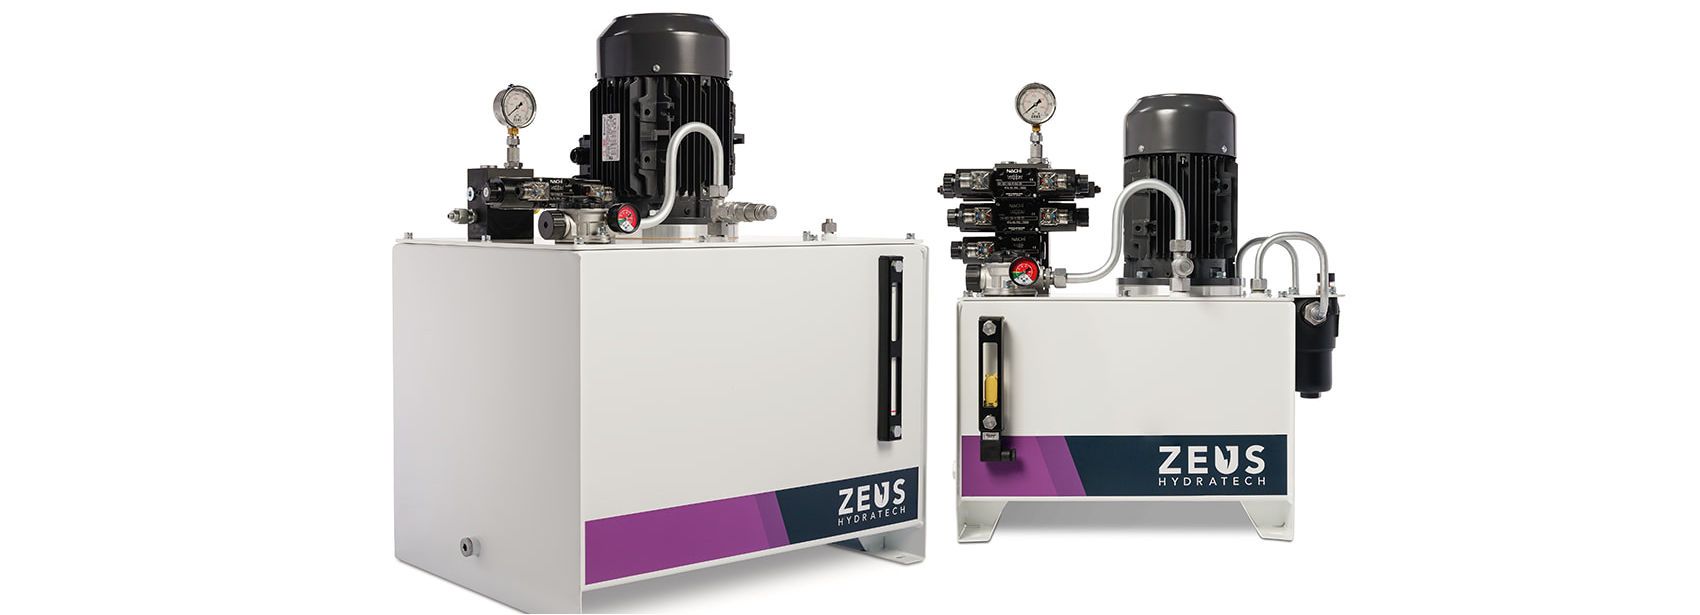 Innovations in Hydraulic Power Pack Design: A Look at Zeus Hydratech's Solutions header image